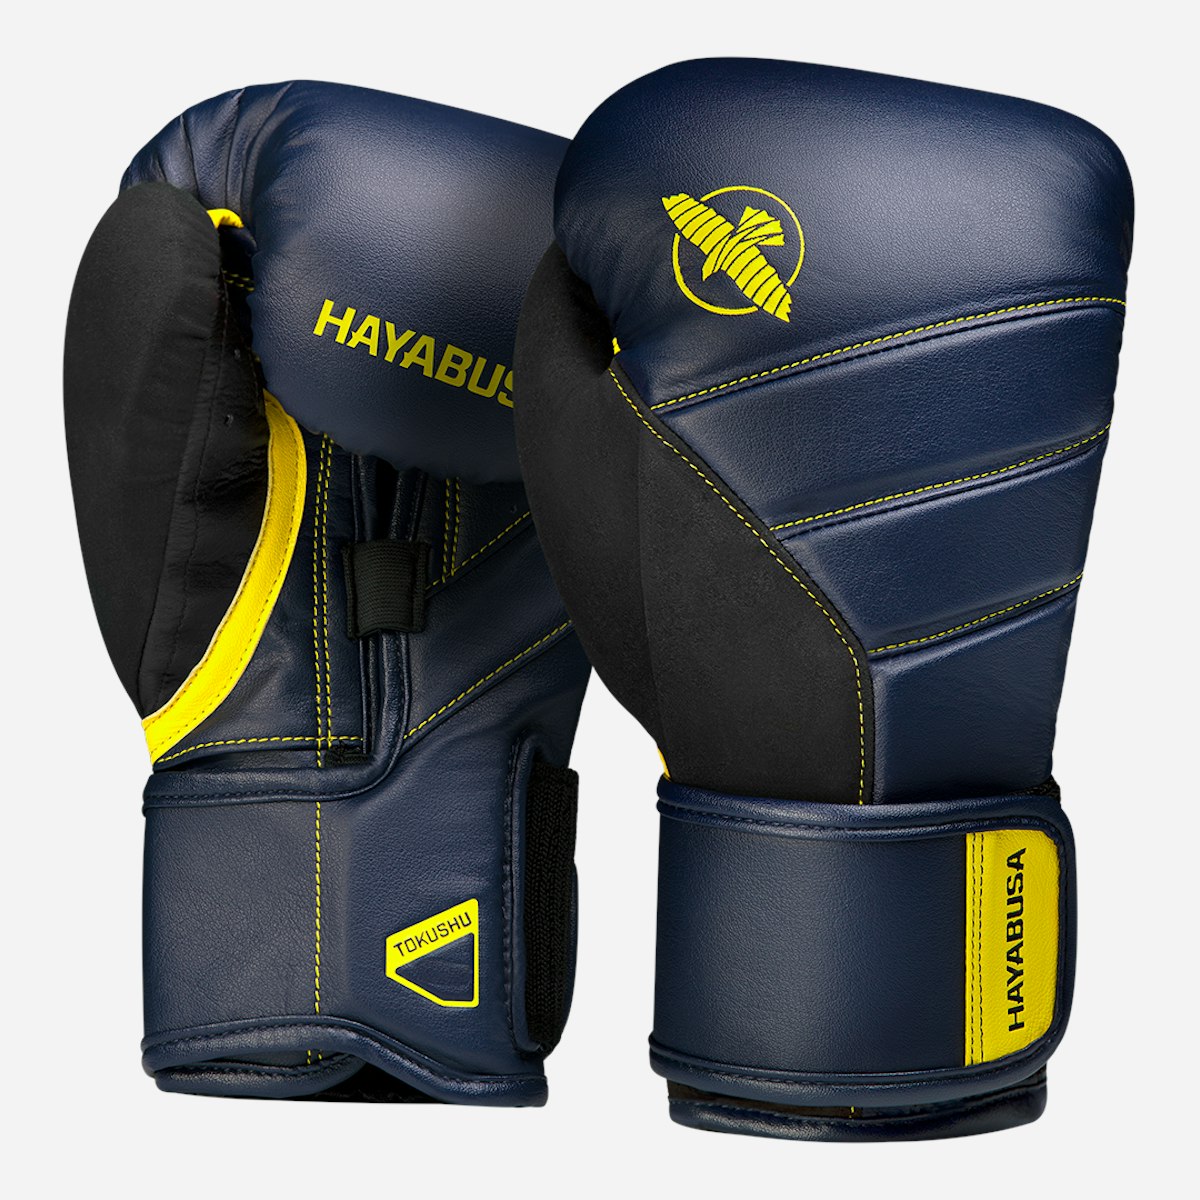 Hayabusa T3 Boxing Gloves | The Best Boxing Gloves • Hayabusa Fight Canada